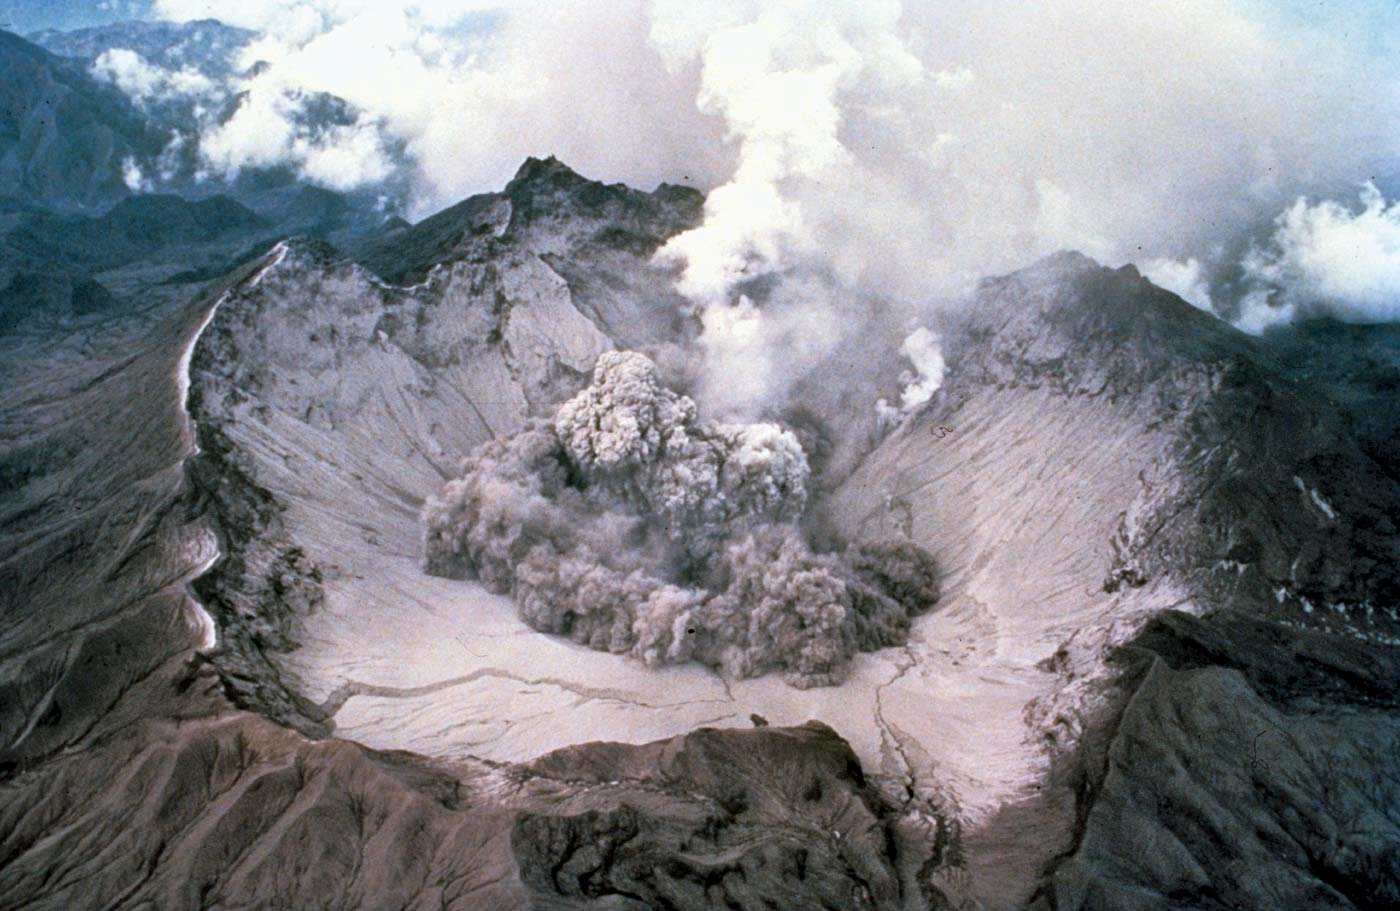 The heavy ashfalls resulting from Mount Pinatubo’s eruption, in June 1991, left about 100,000 people homeless, forced thousands more to flee the area, and caused 300 deaths. (Source: TJ Casadevall/USGS)